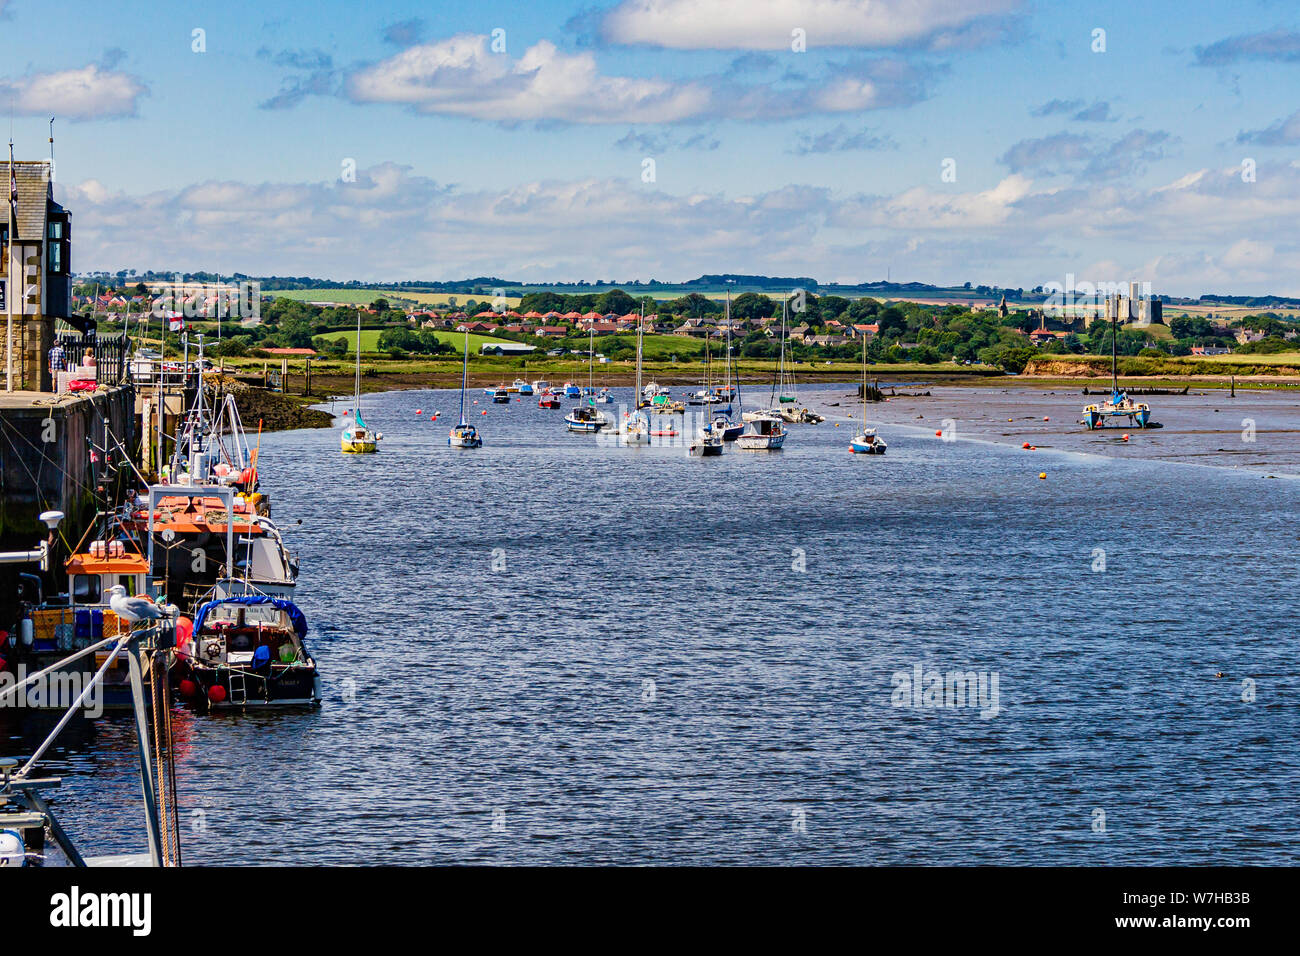 A view over the tidal Coquet Estuary at Amble towards Warkworth village and castle, Northumberland, UK. July 2019. Stock Photo